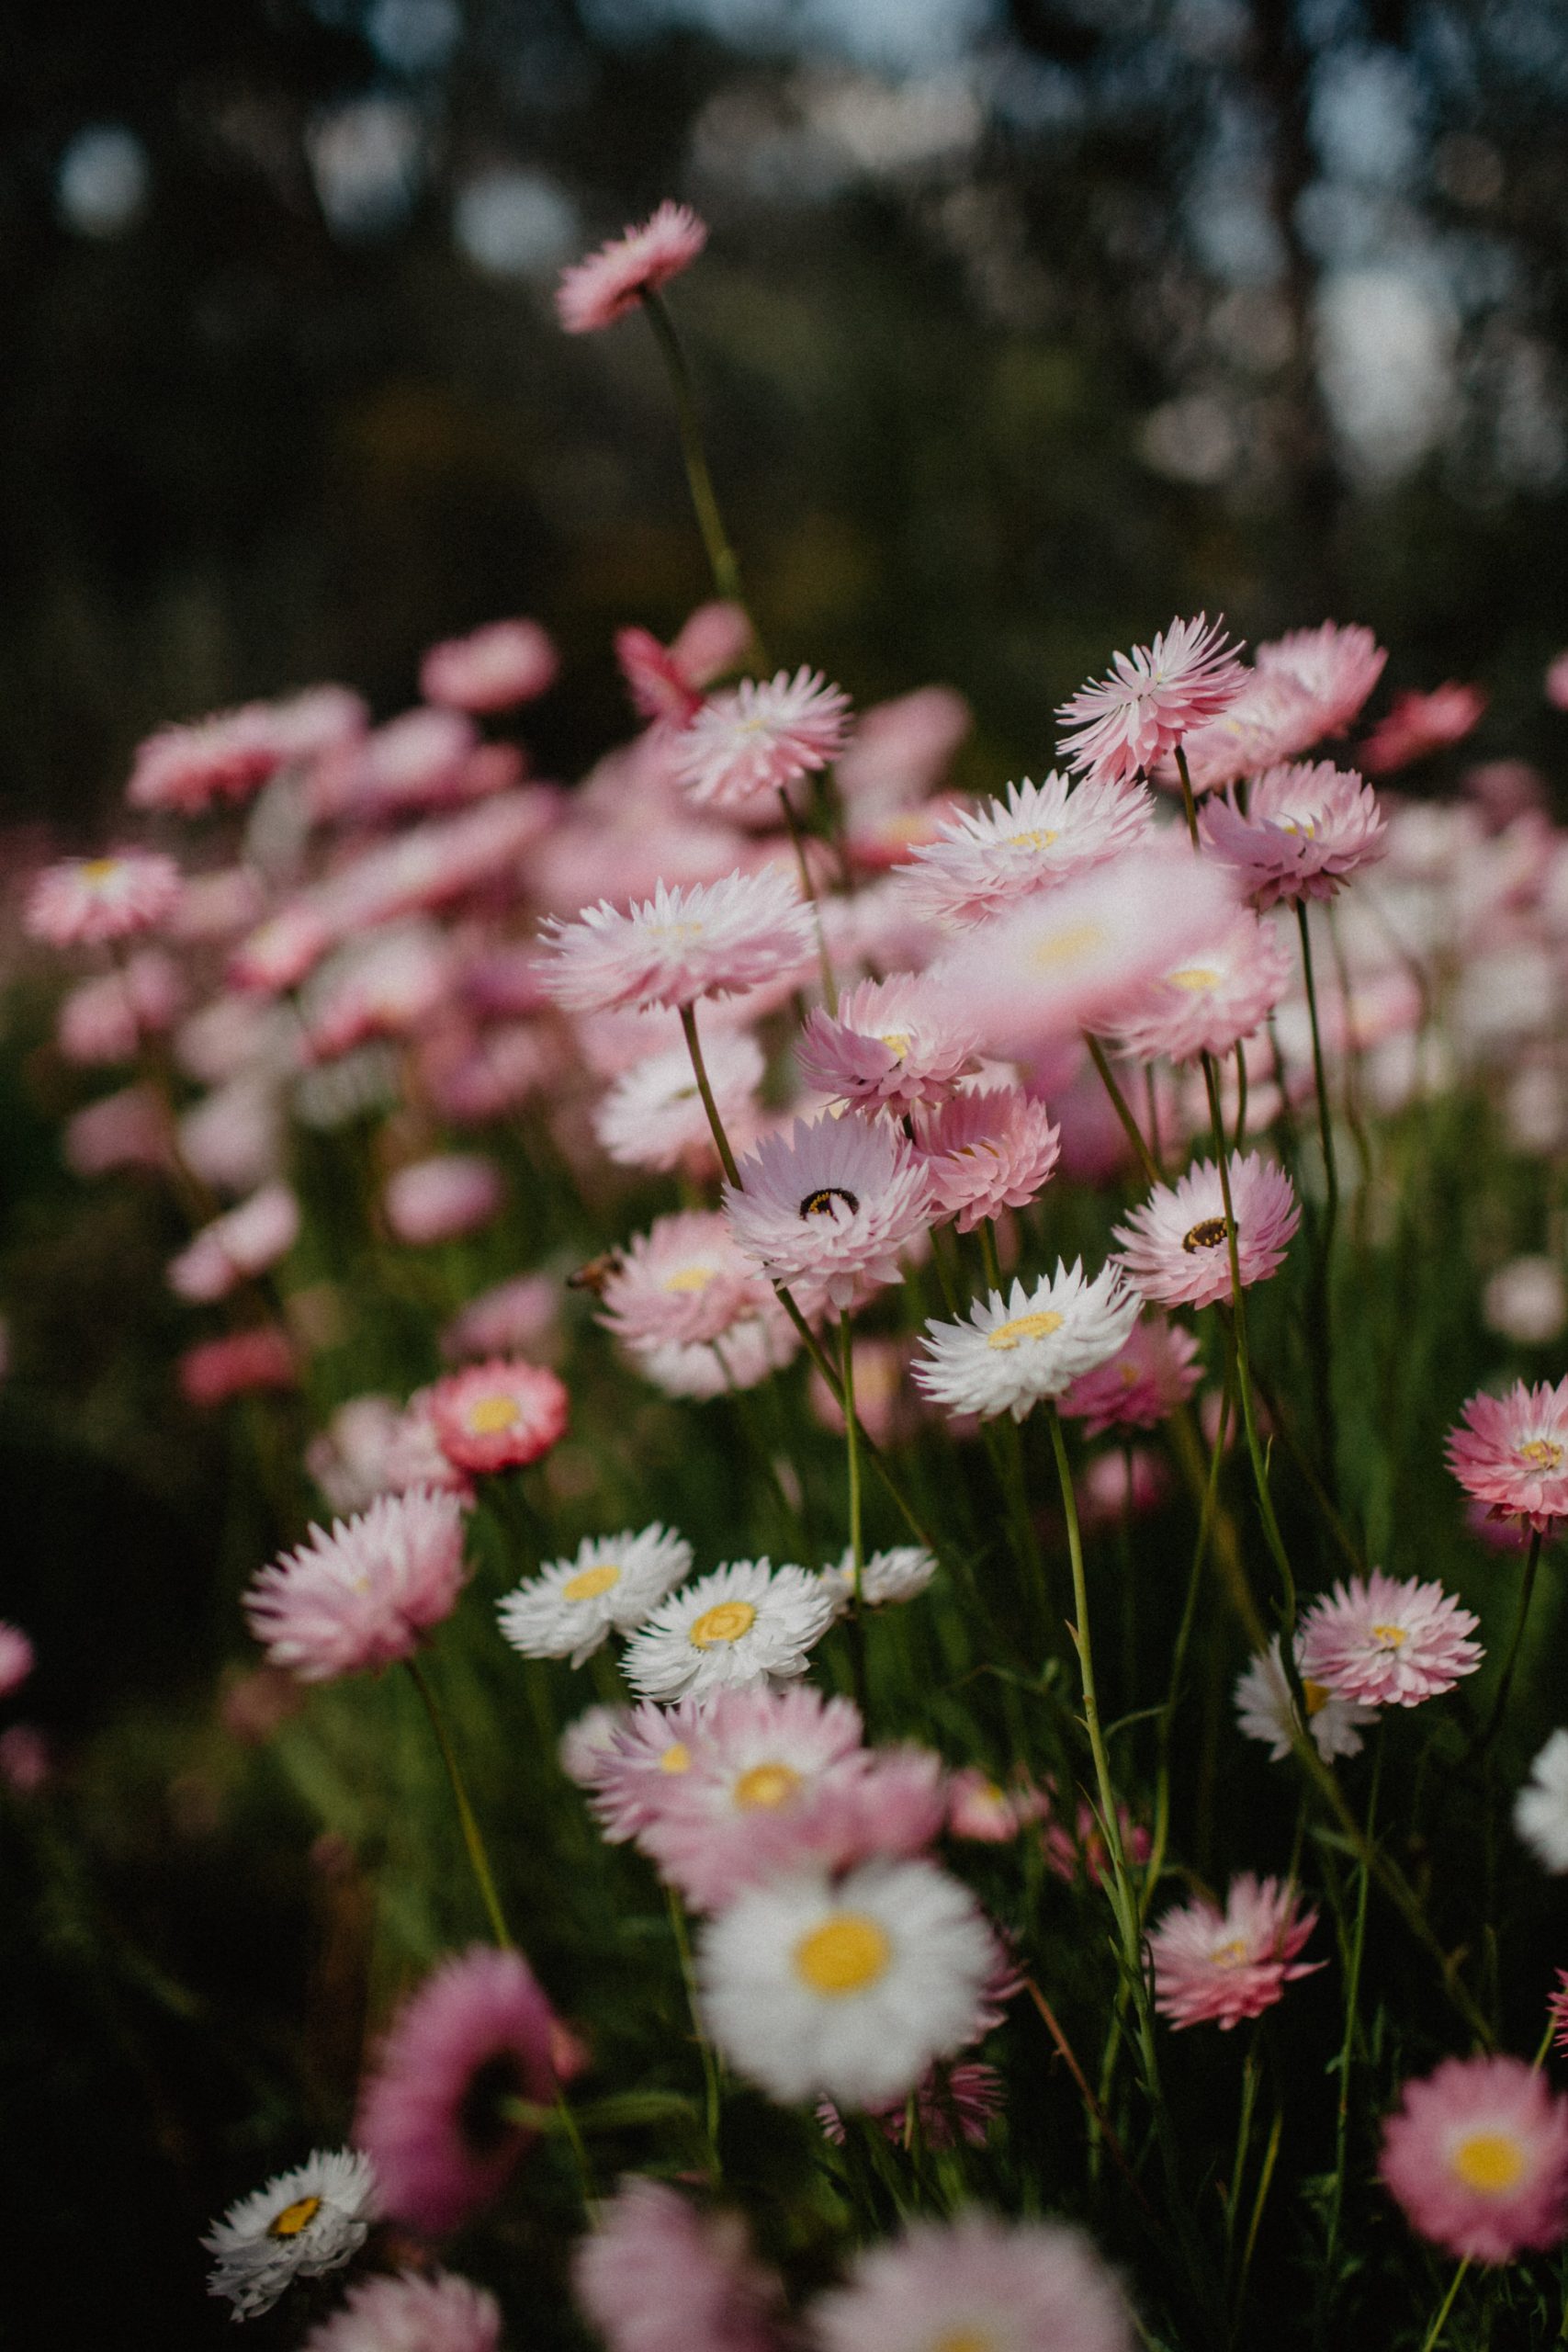 A close-up photograph of bright pink and white wildflowers with green stems and yellow centres.